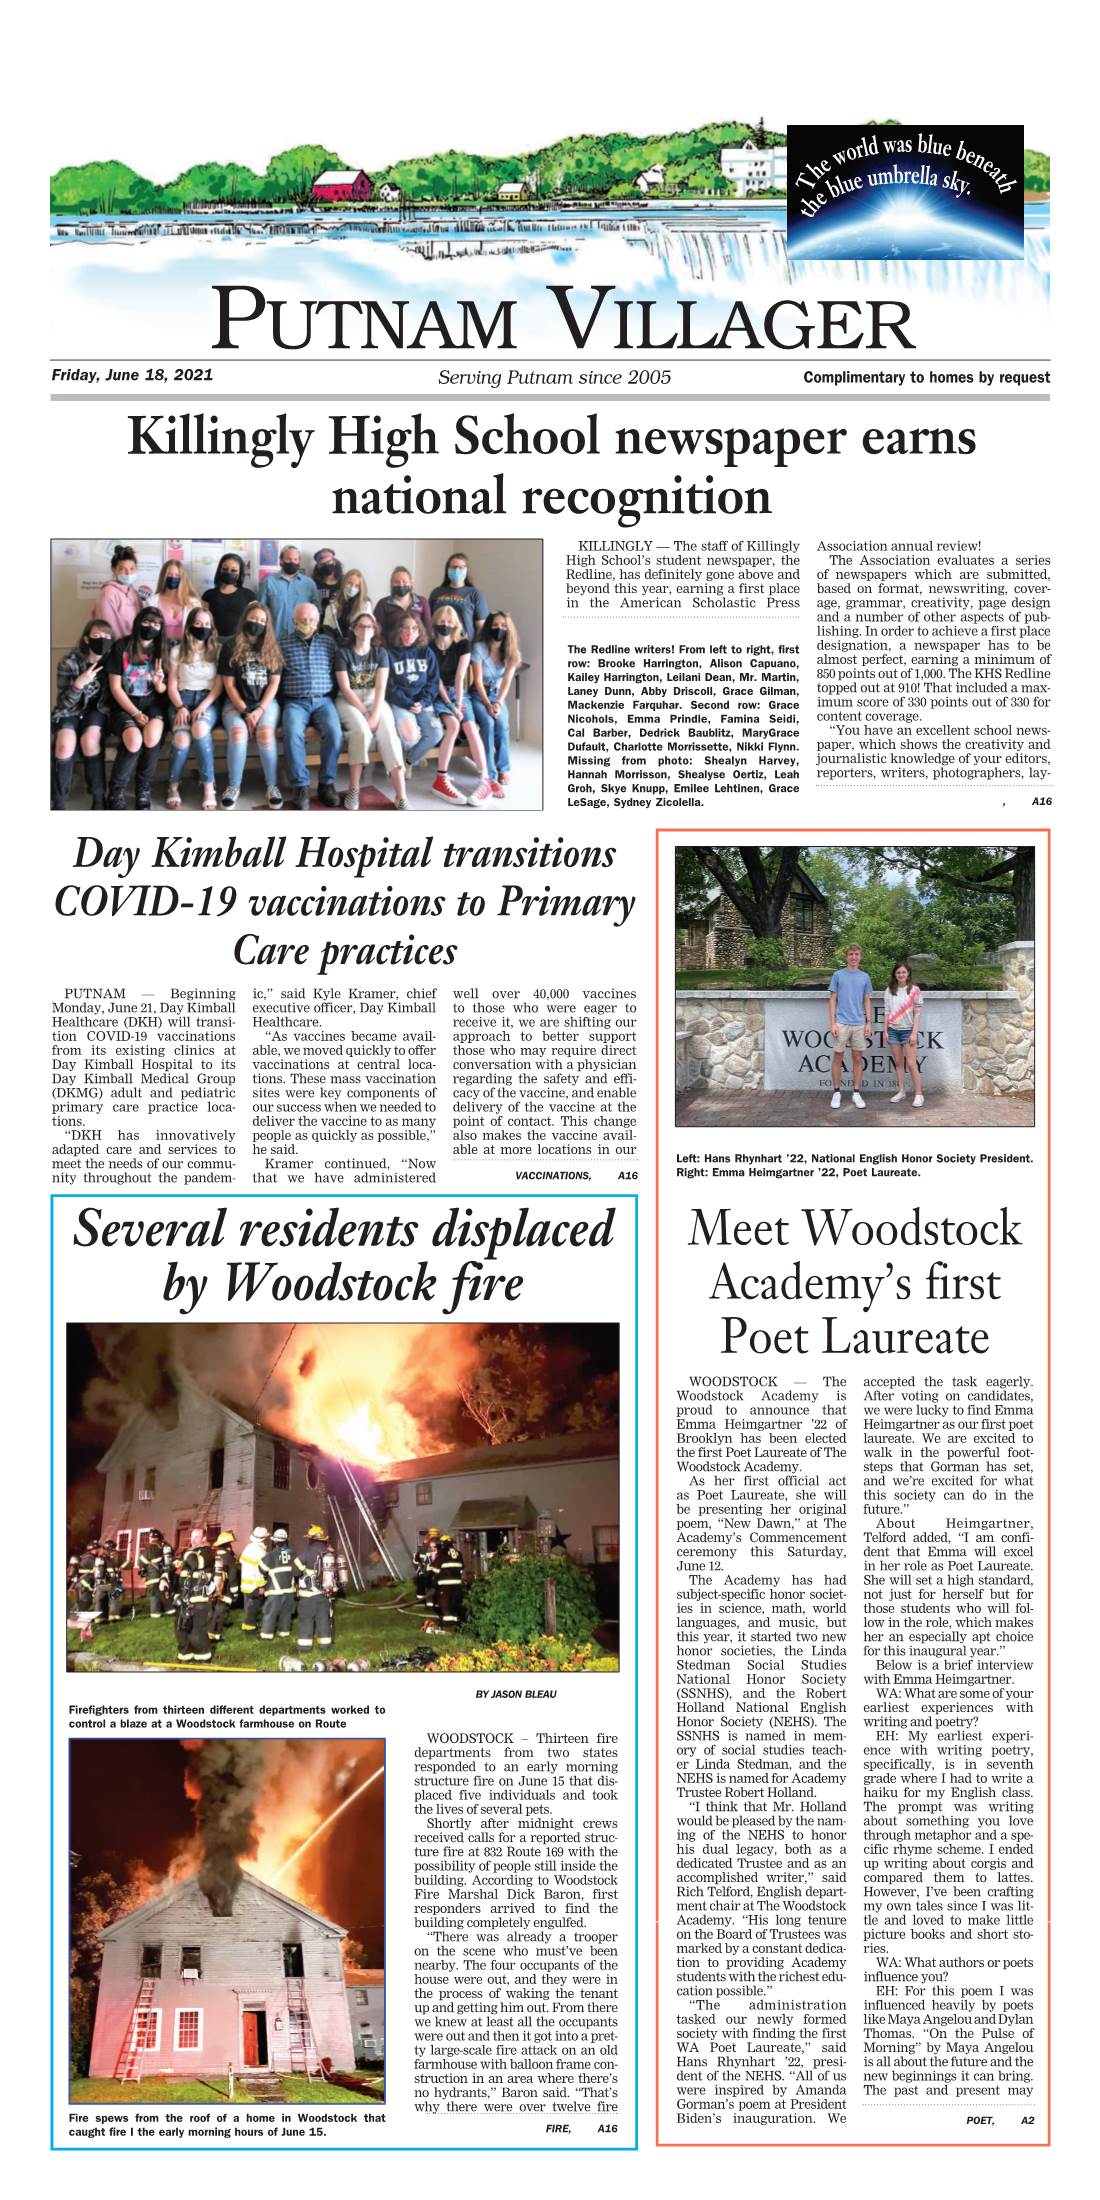 PUTNAM VILLAGER Friday, June 18, 2021 Serving Putnam Since 2005 Complimentary to Homes by Request Killingly High School Newspaper Earns National Recognition